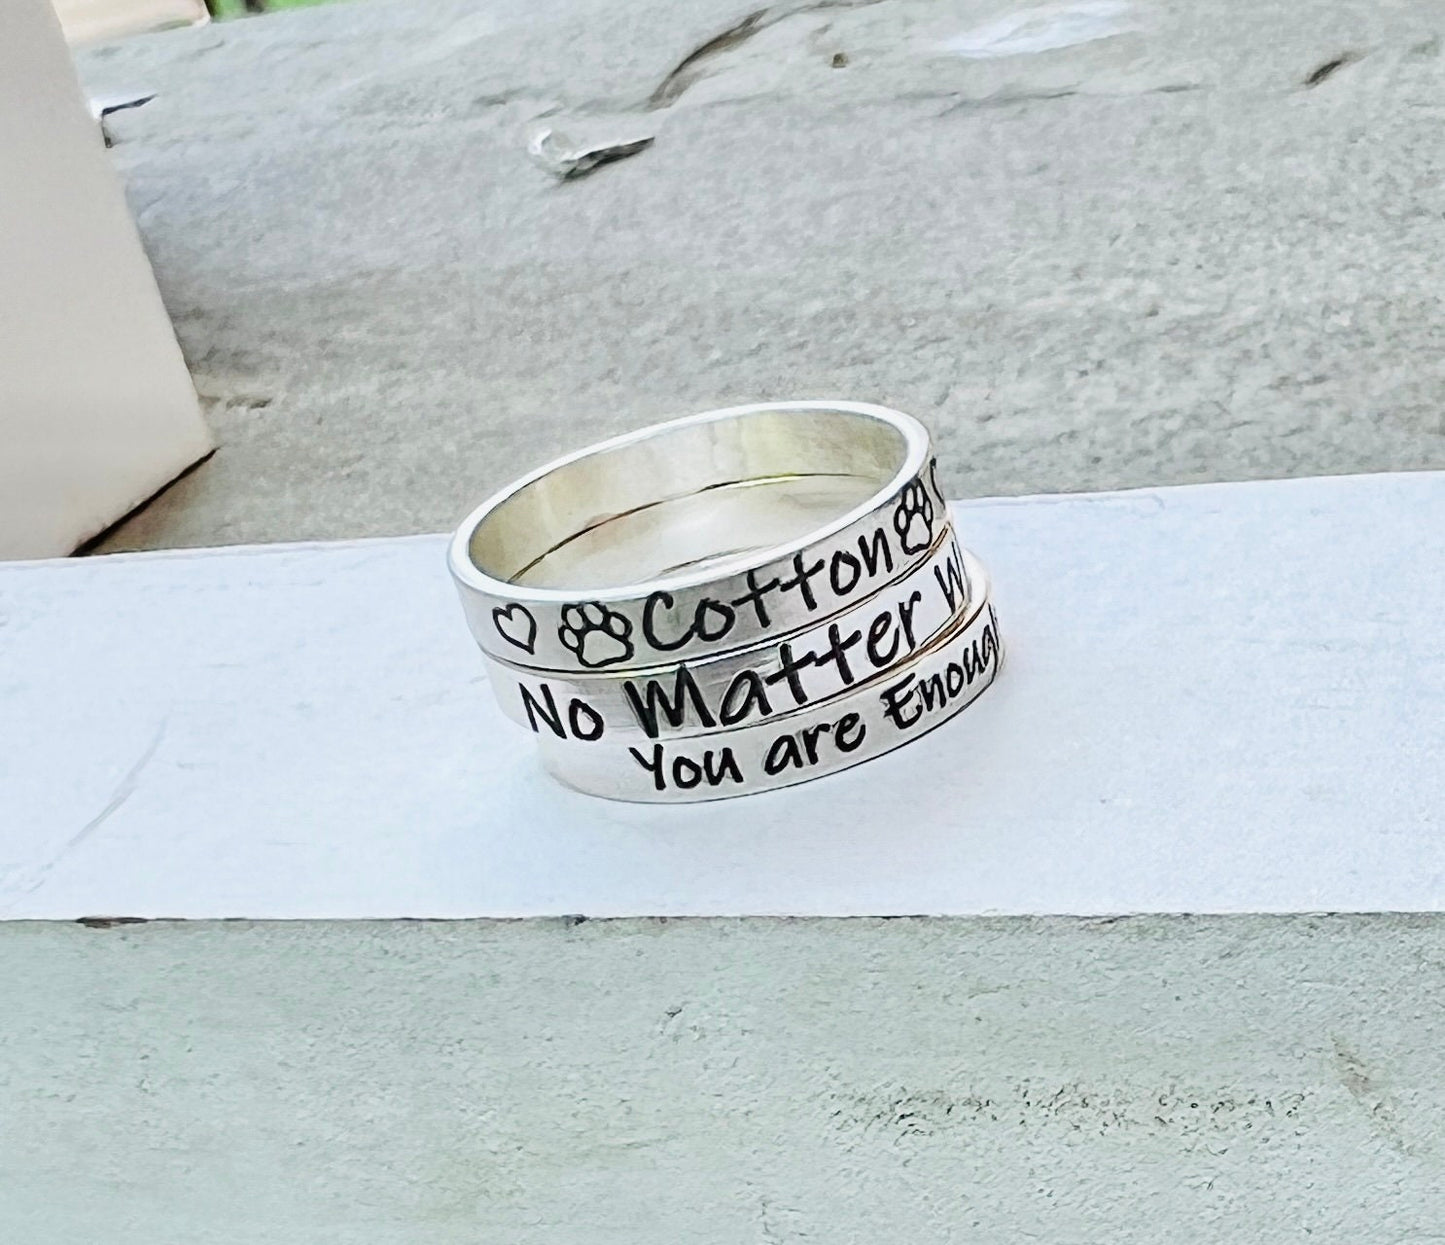 You are enough Ring, Solid Sterling Silver